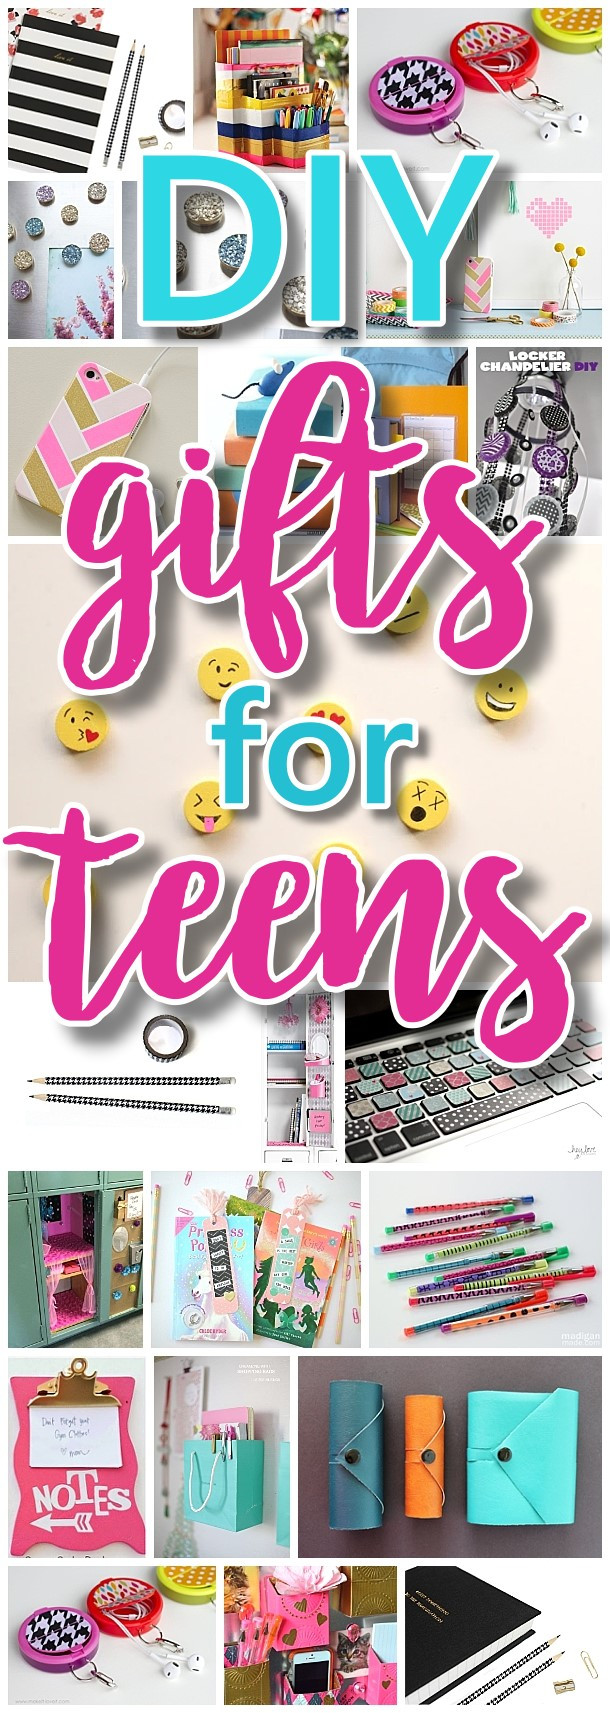 DIY Christmas Gifts For Teenagers
 The BEST DIY Gifts for Teens Tweens and Best Friends